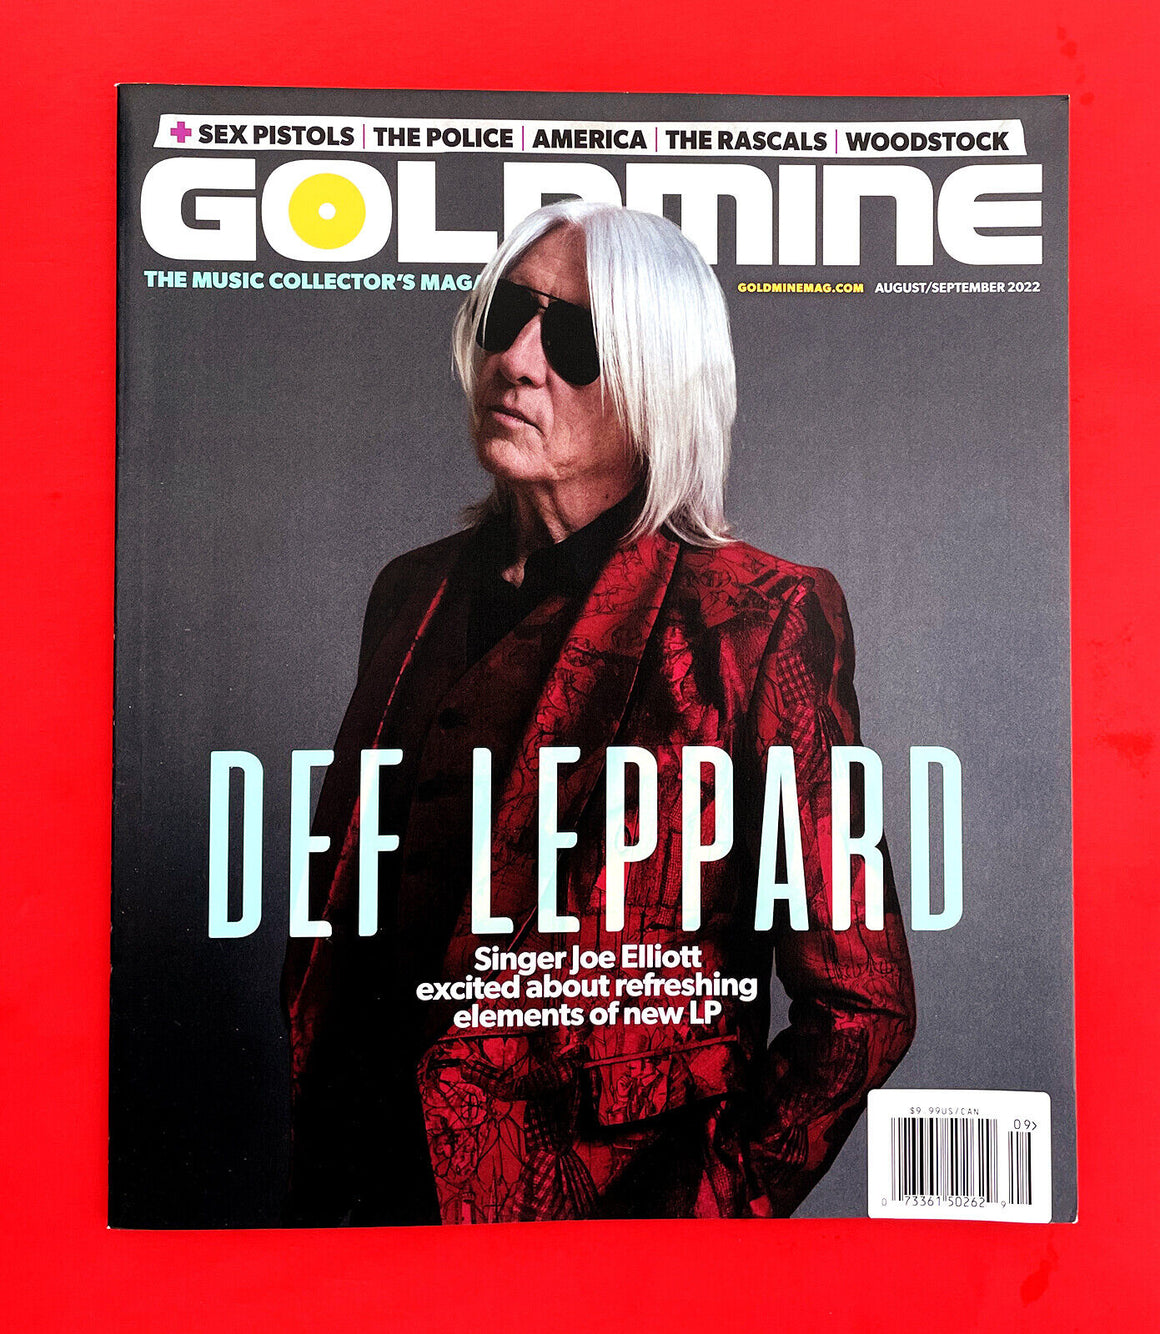 Goldmine Magazine AUGUST SEPTEMBER 2022 - DEF LEPPARD (US Customers only)